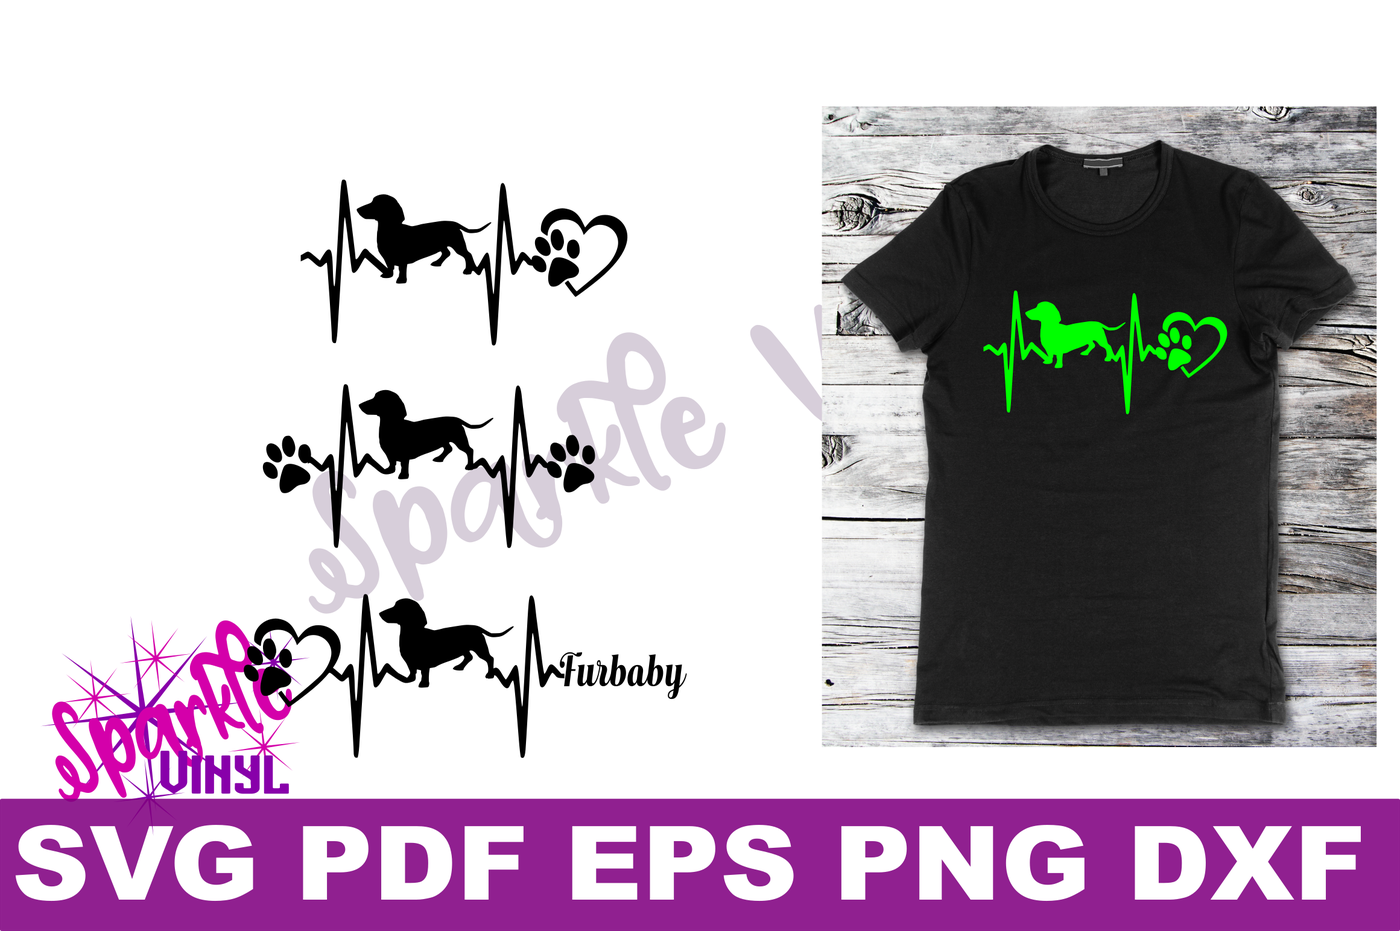 Svg Bundle Dachshund Heartbeat Dog Print Printable Or Cut File Svg Dxf Eps Pdf Png Files Cricut Silhouette Gift For Dog Lover Dachshund By Sparkle Vinyl Designs Thehungryjpeg Com